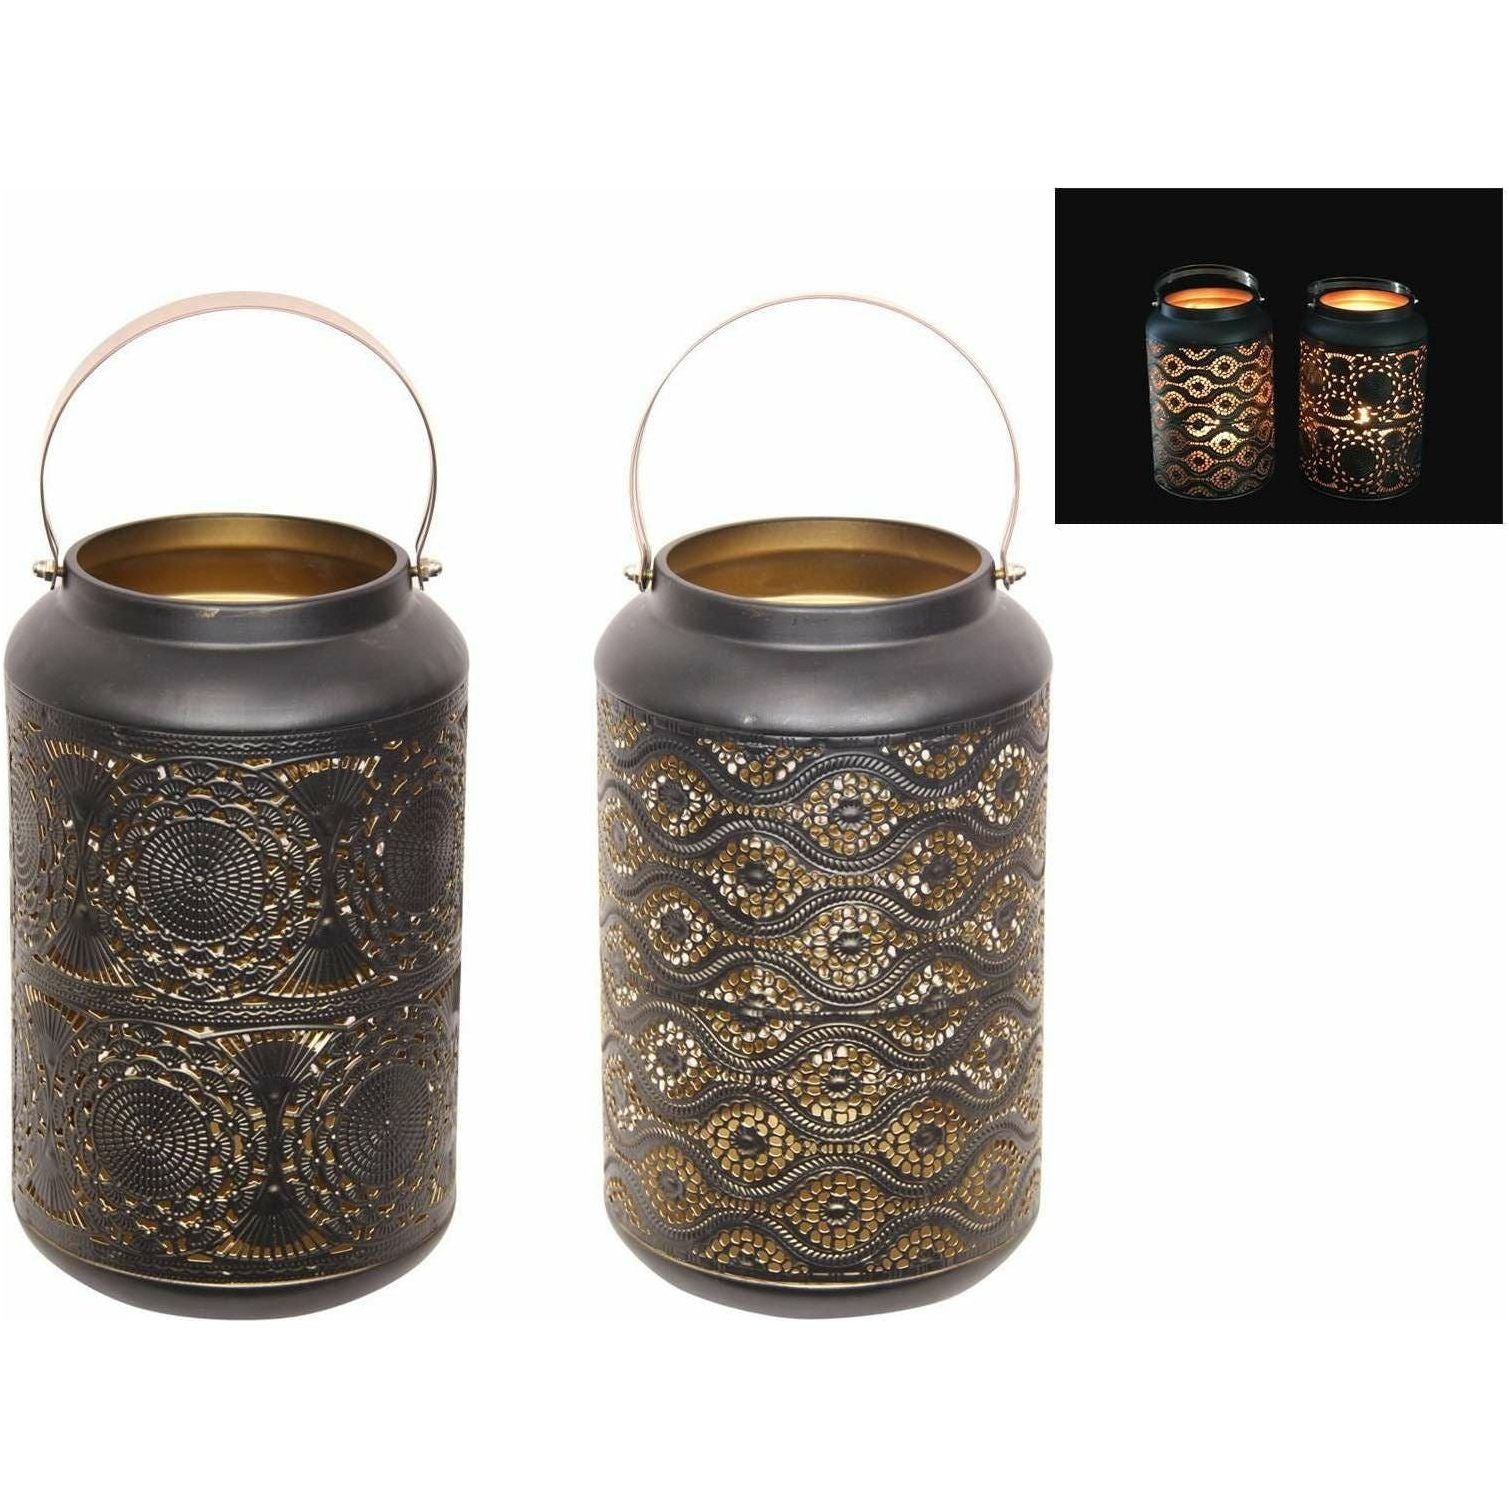 Black and Gold Moroccan Lantern - 1pce Assorted Designs 34cm - Dollars and Sense